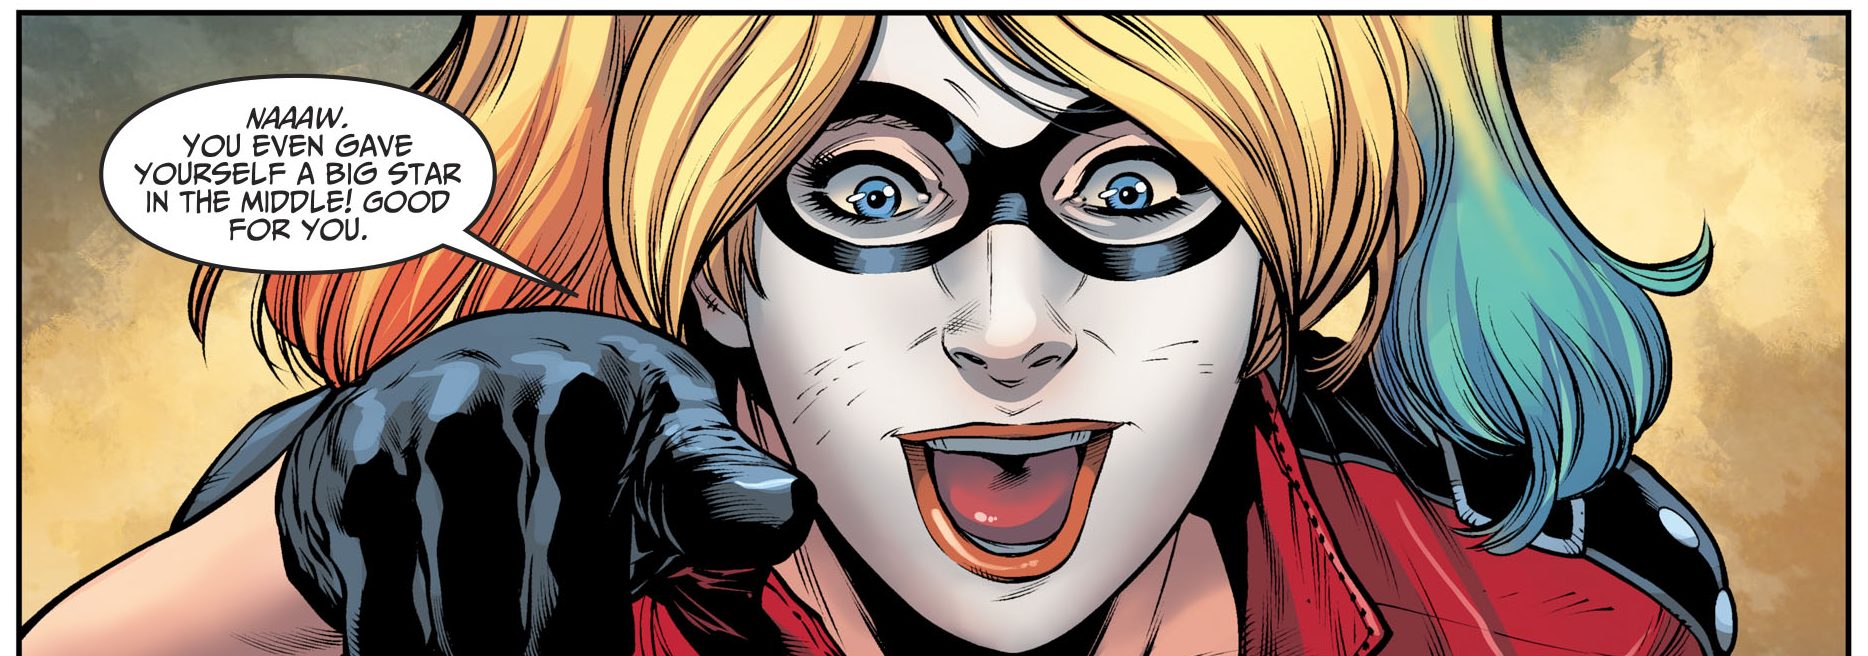 Harley Quinn Meets Booster Gold (Injustice II)